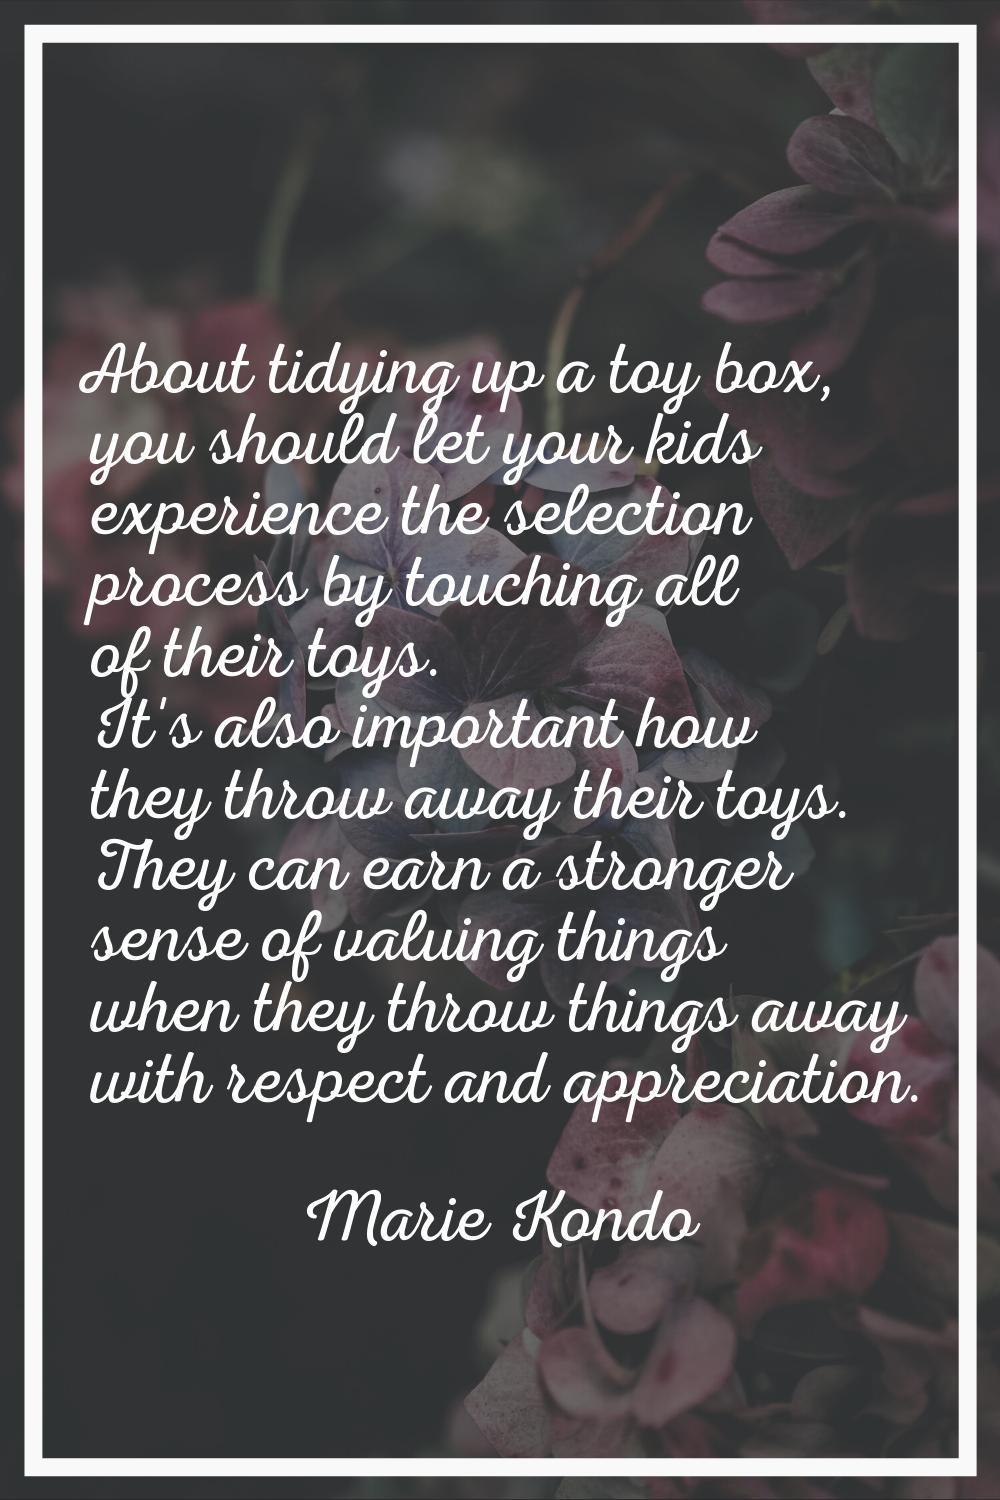 About tidying up a toy box, you should let your kids experience the selection process by touching a